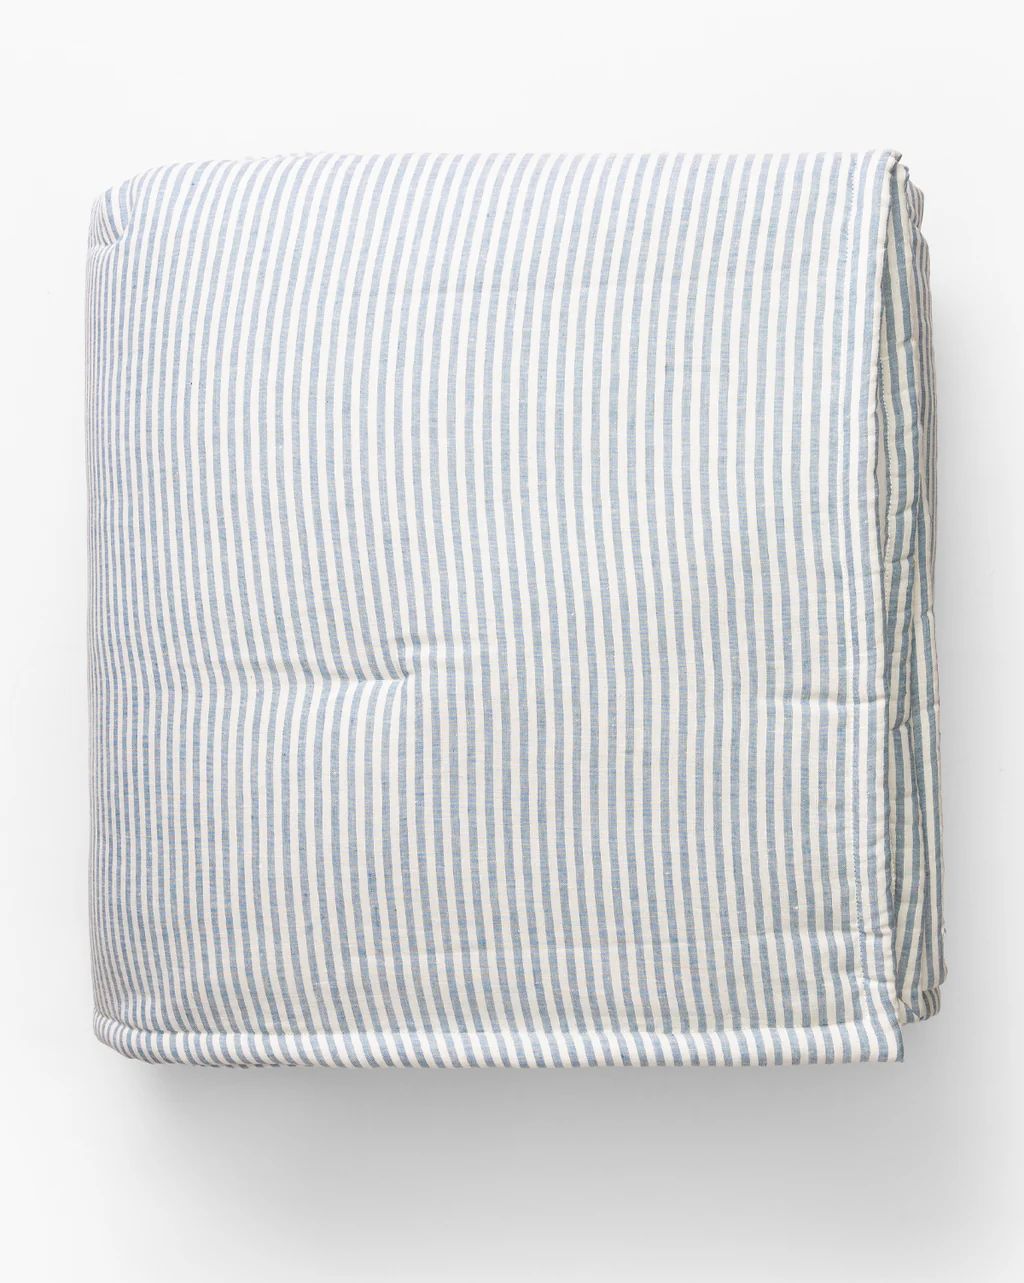 Rosemary Quilt | McGee & Co.